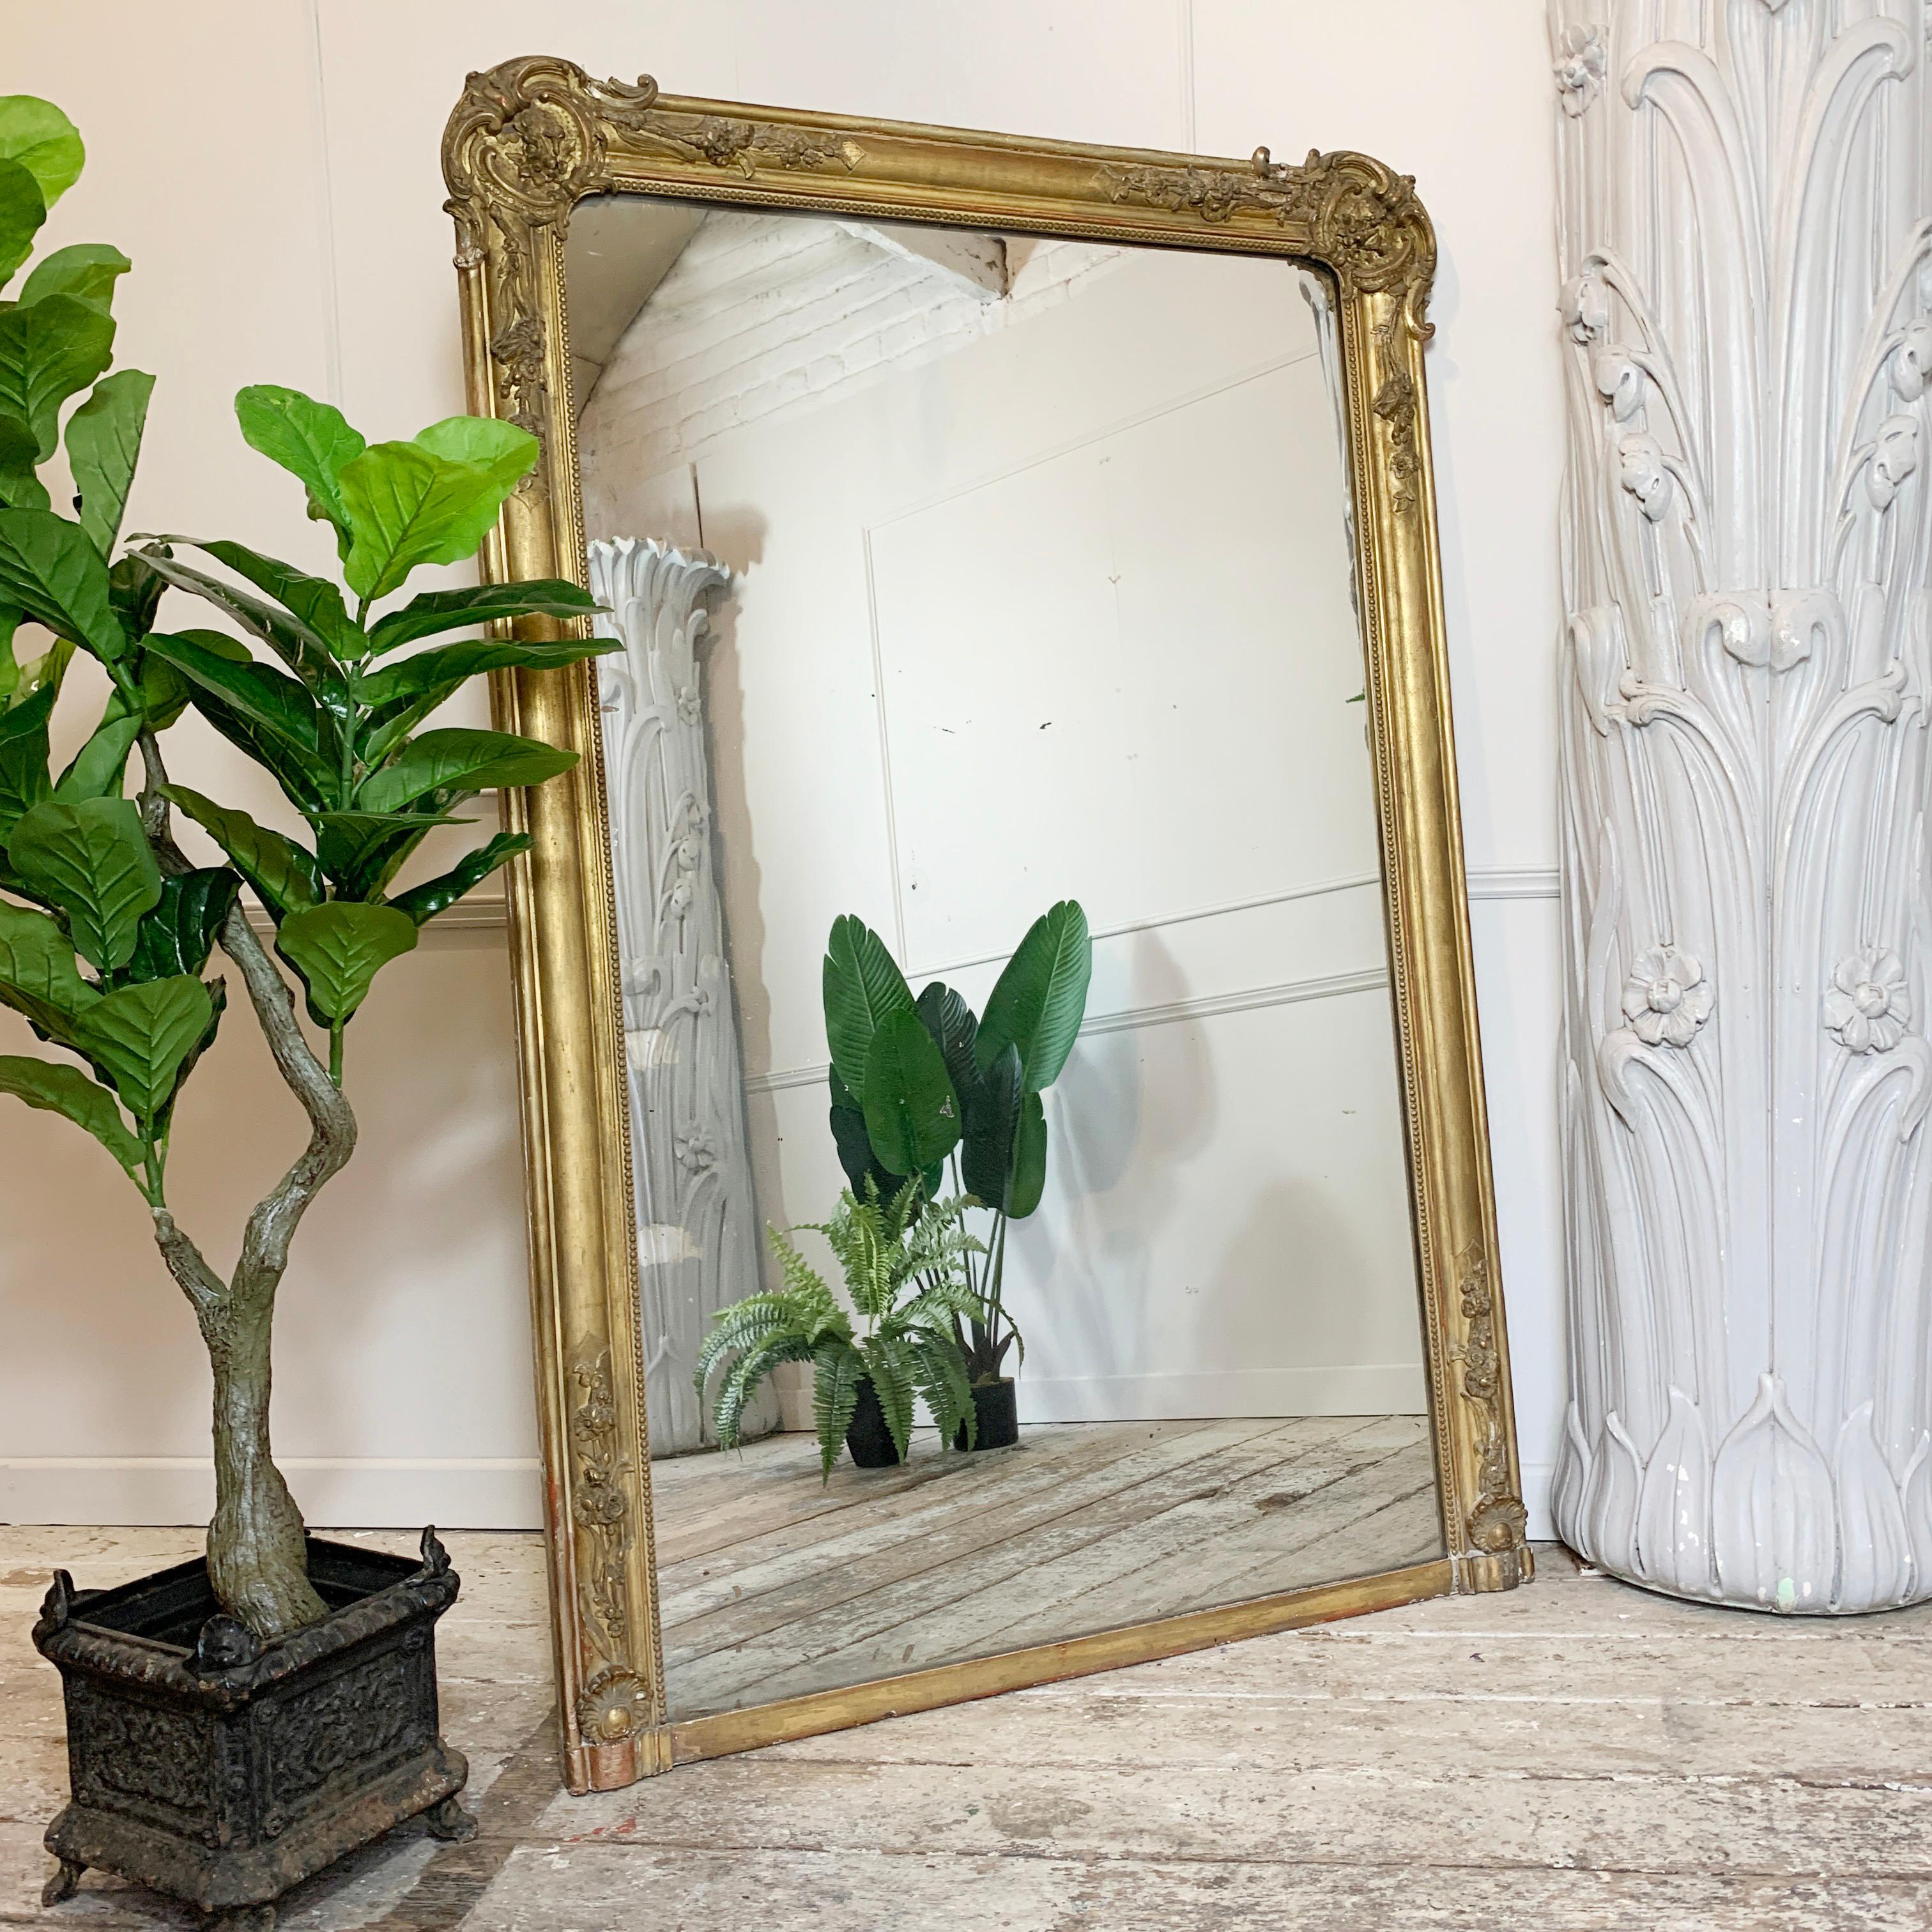 A quite extraordinary gilt French mirror, dating to the early 1800’s, the huge scale gilt gesso over wood frame, and thick mercury glass plate give this piece a fantastic look.

It is hard to see on the photos, but the foxing process on the